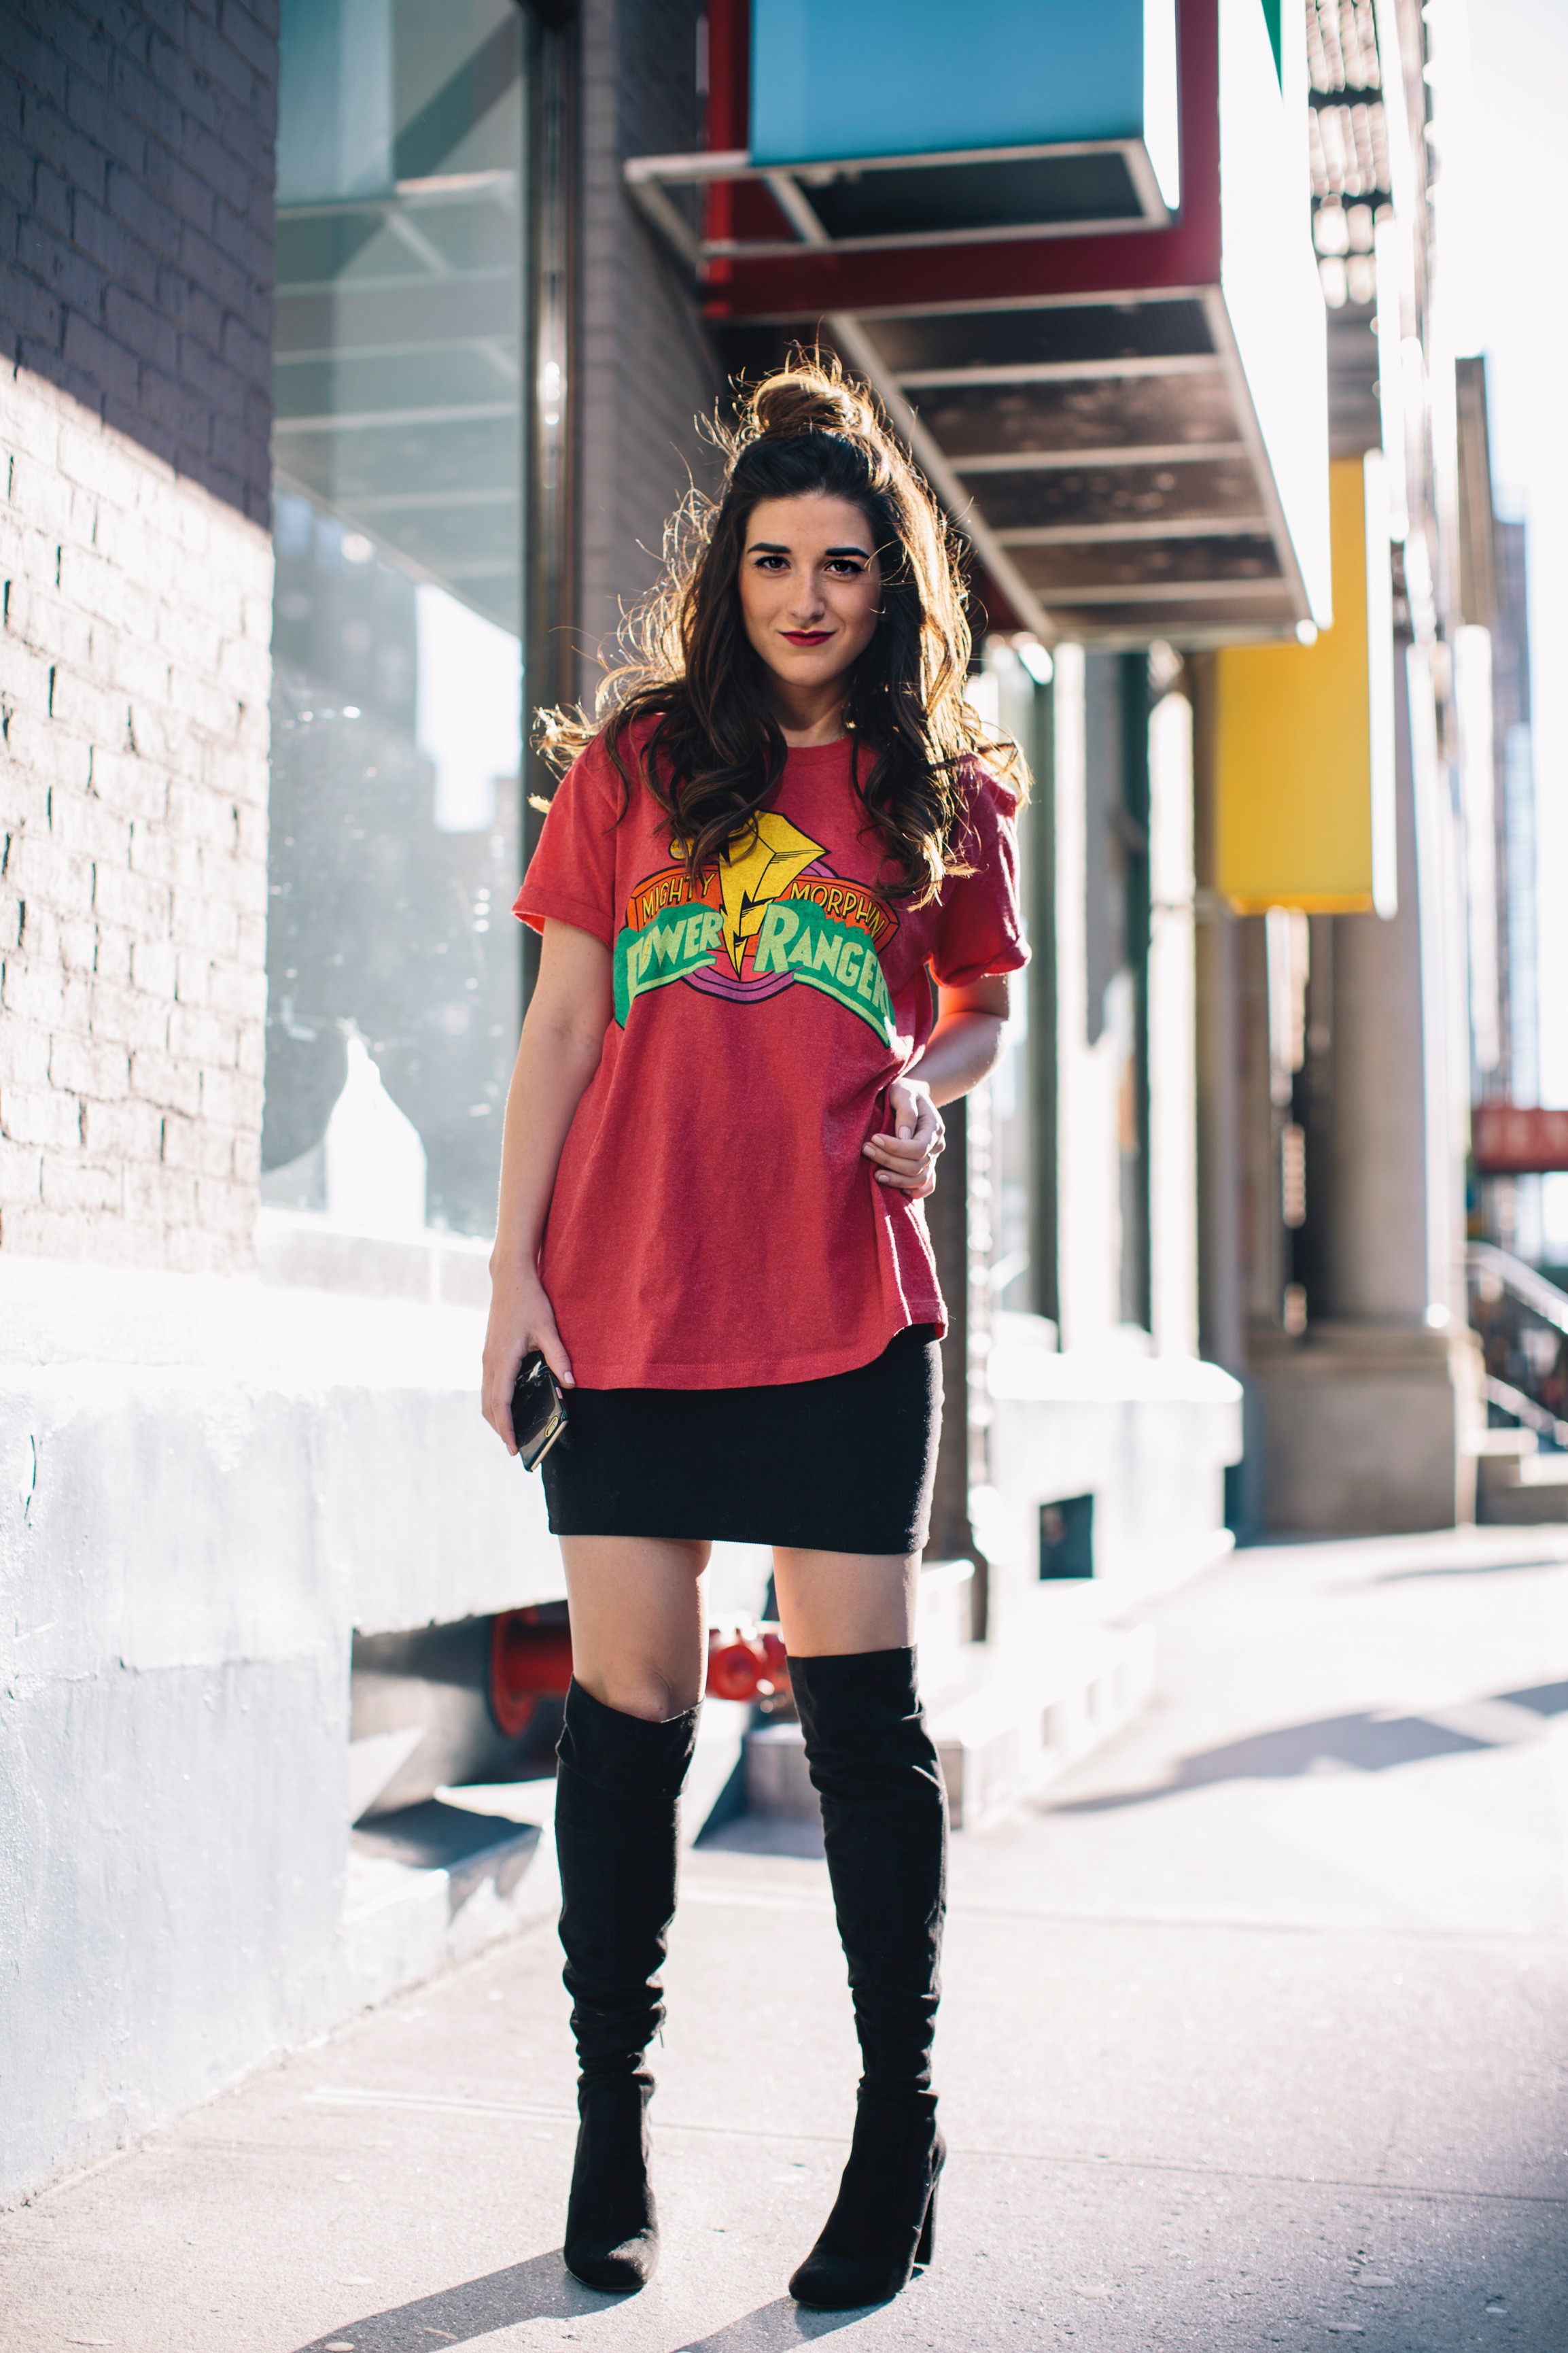 Power Rangers Tee + OTN Boots Hashtag Blogger Problems Louboutins & Love Fashion Blog Esther Santer NYC Street Style Blogger Outfit OOTD Trendy Red Top Black Mini Skirt Women Girl What To Wear Shopping Phone Hair  Bun Topknot Fun Edgy Graphic T-Shirt.jpg